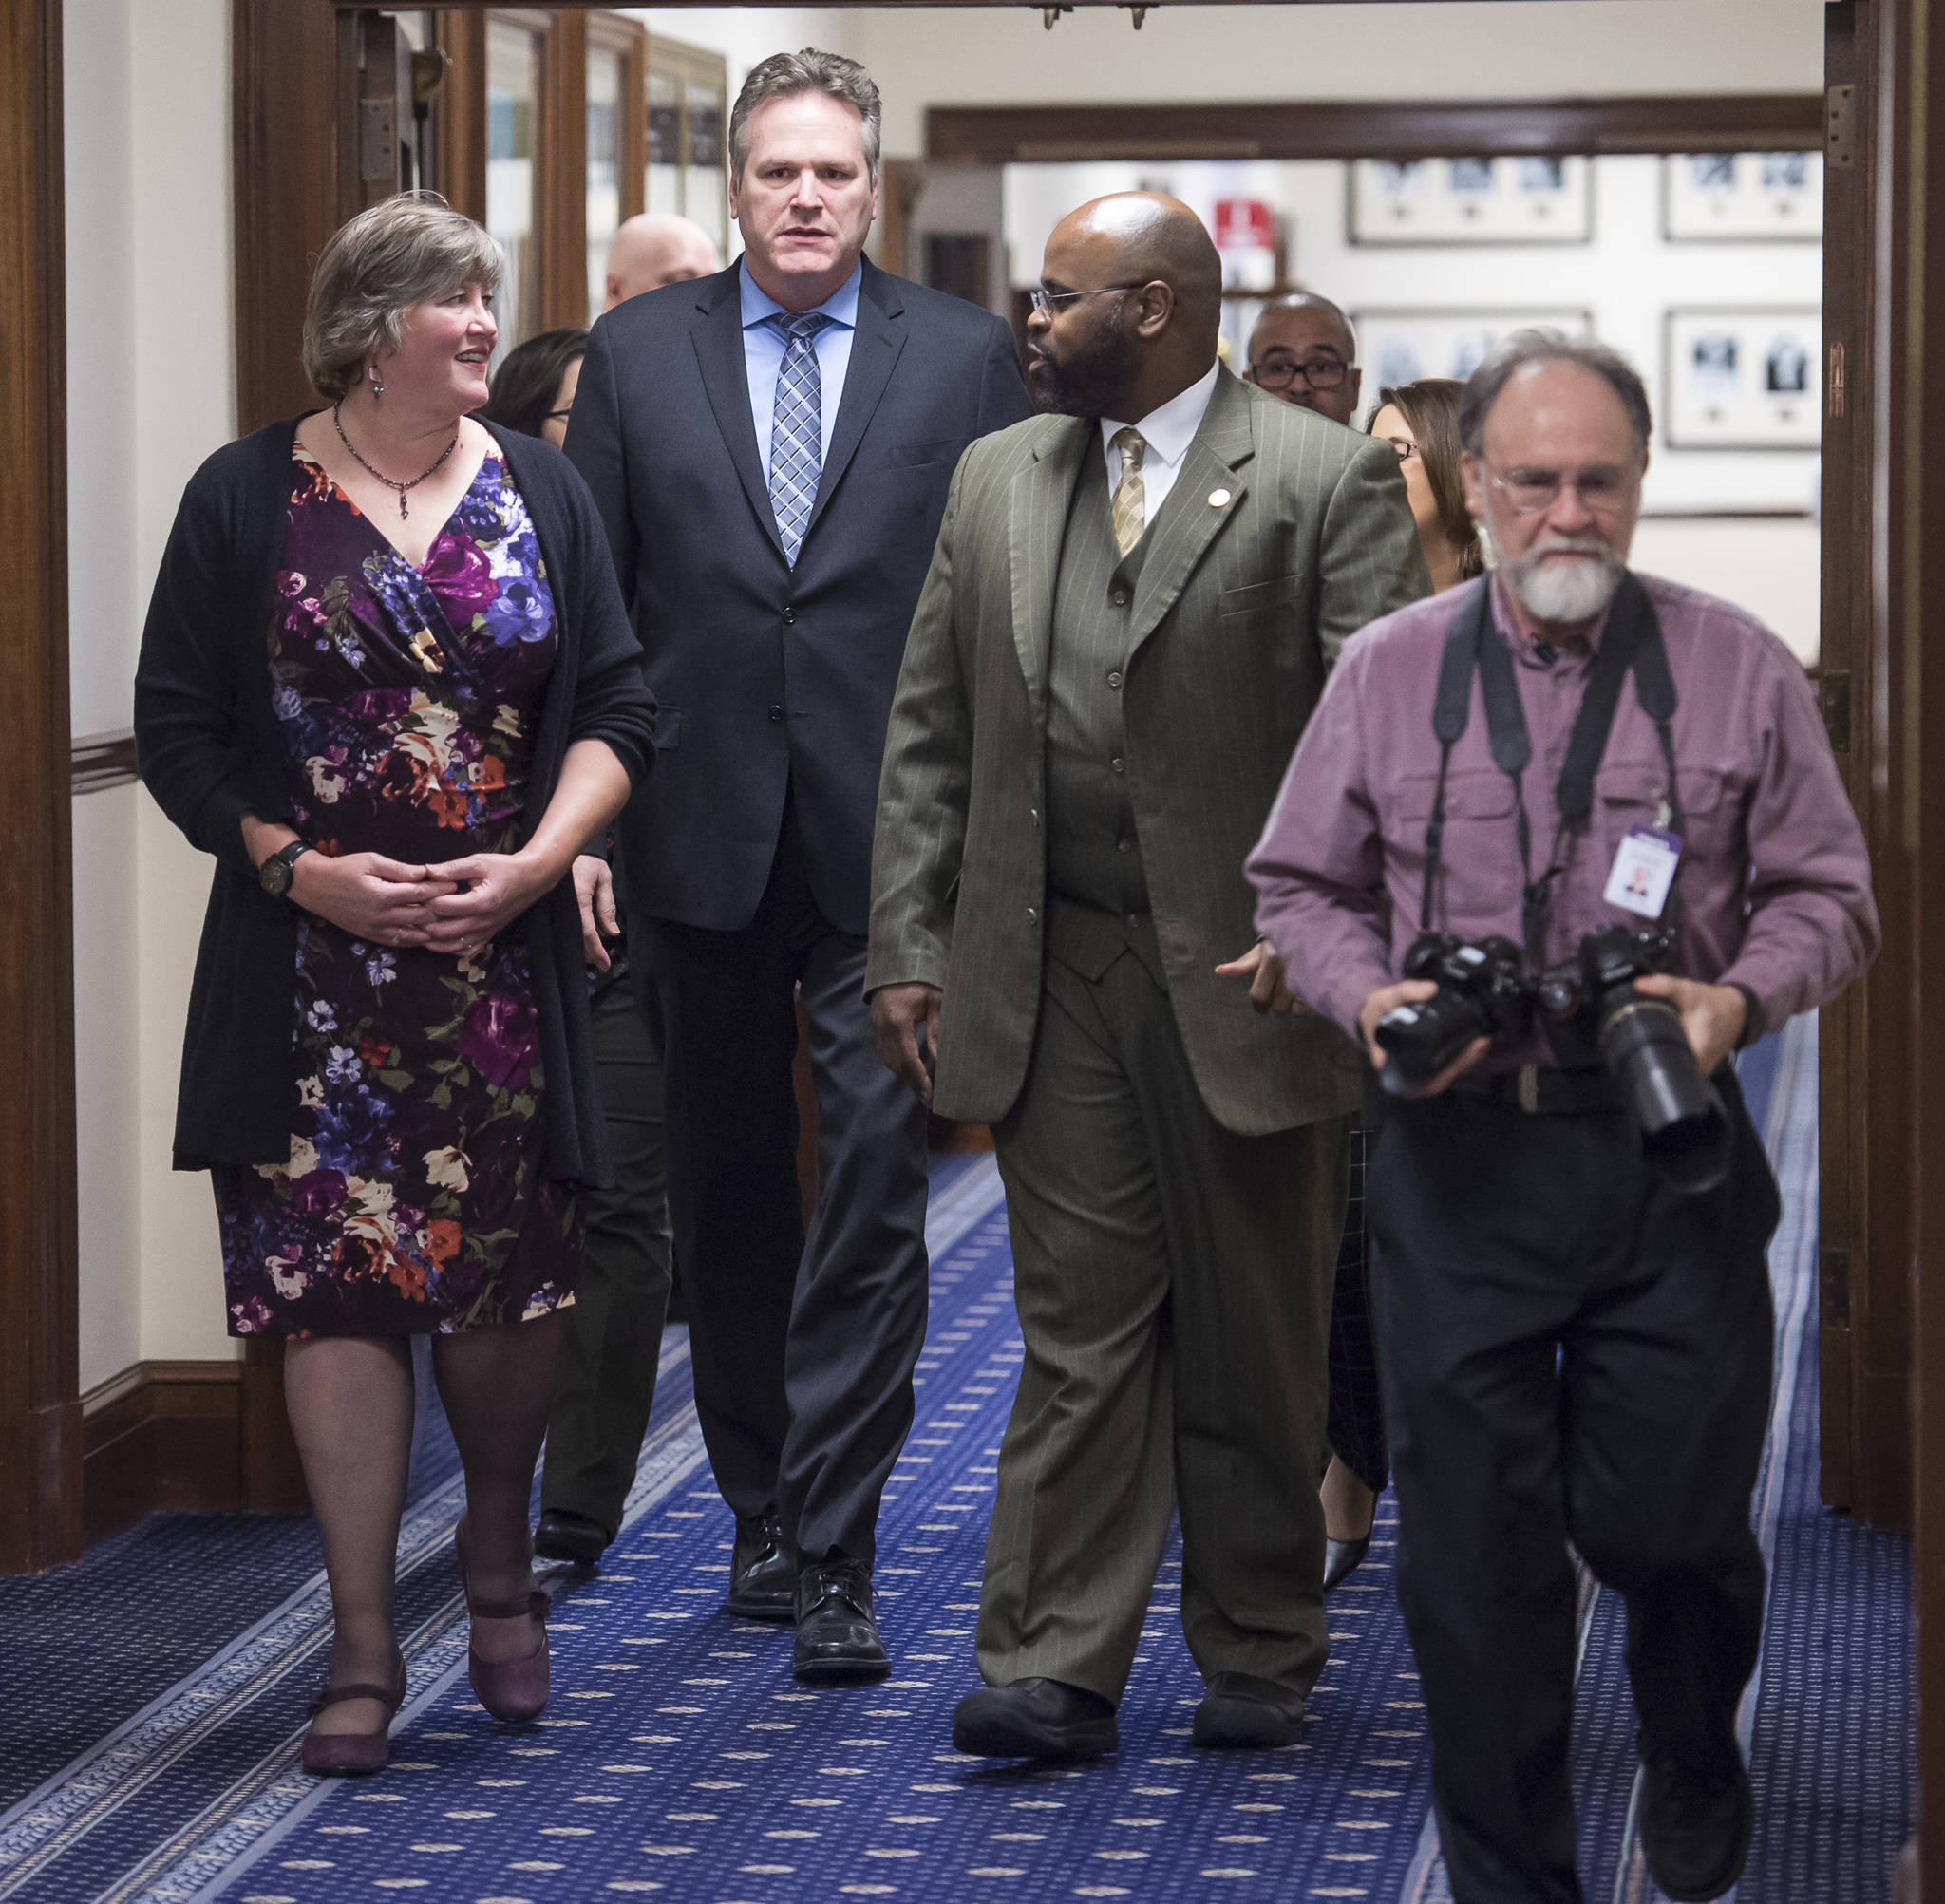 Gov. Mike Dunleavy is escorted to his State of the State speech in the House chamber at the Capitol in Juneau, Alaska, by Rep. Sara Hannan, D-Juneau, left, and Sen. David Wilson, R-Wasilla, (and Gavel Alaska’s Skip Gray, right) to a Joint Session of the Alaska Legislature on Tuesday, Jan. 22, 2019. (Michael Penn | Juneau Empire)